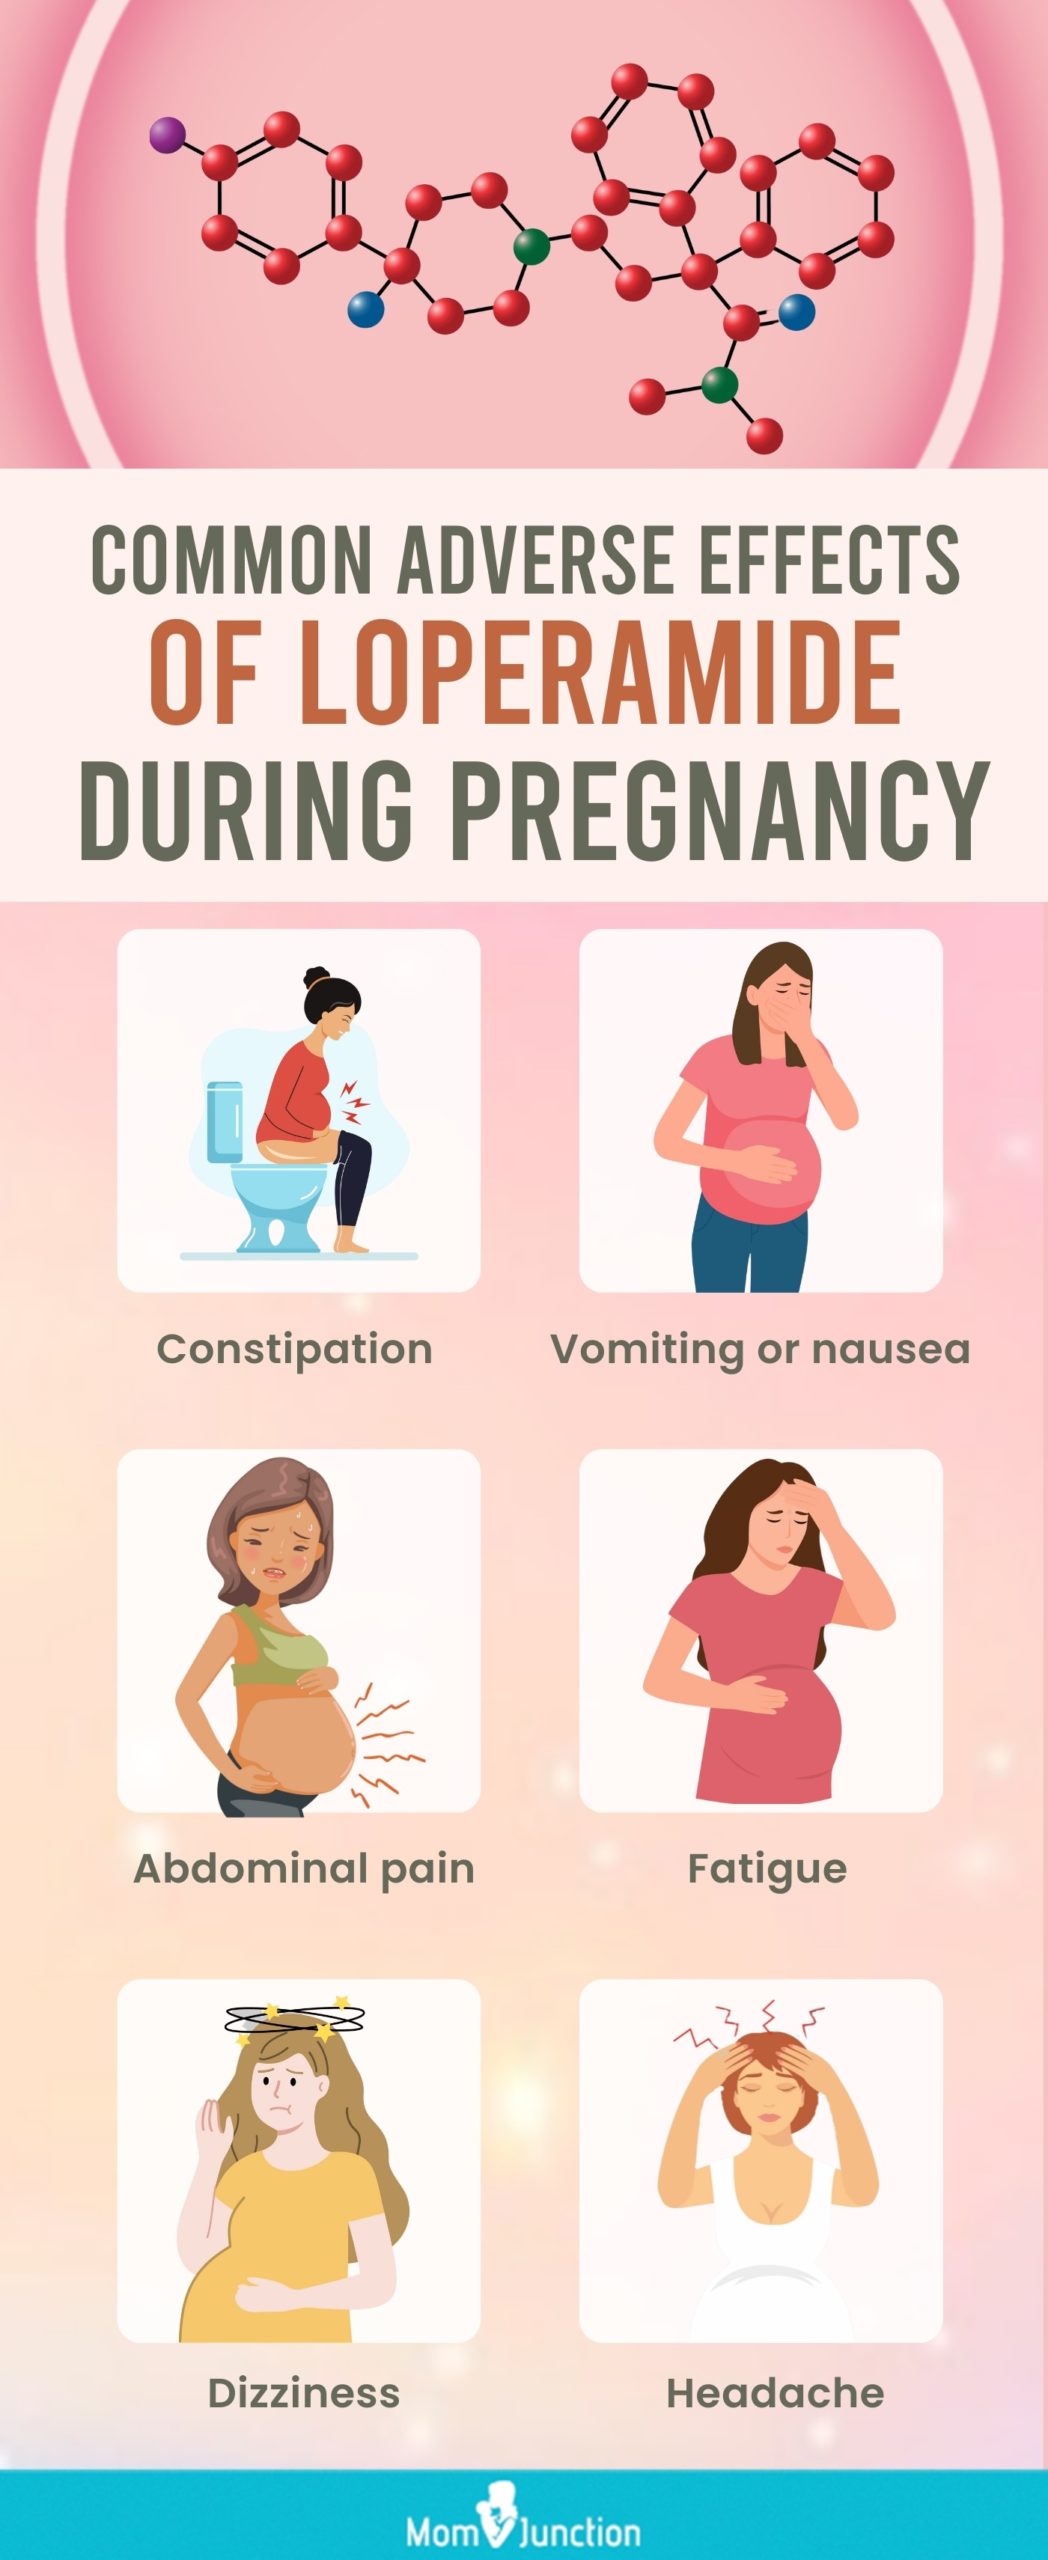 common adverse effects of loperamide during pregnancy [infographic]